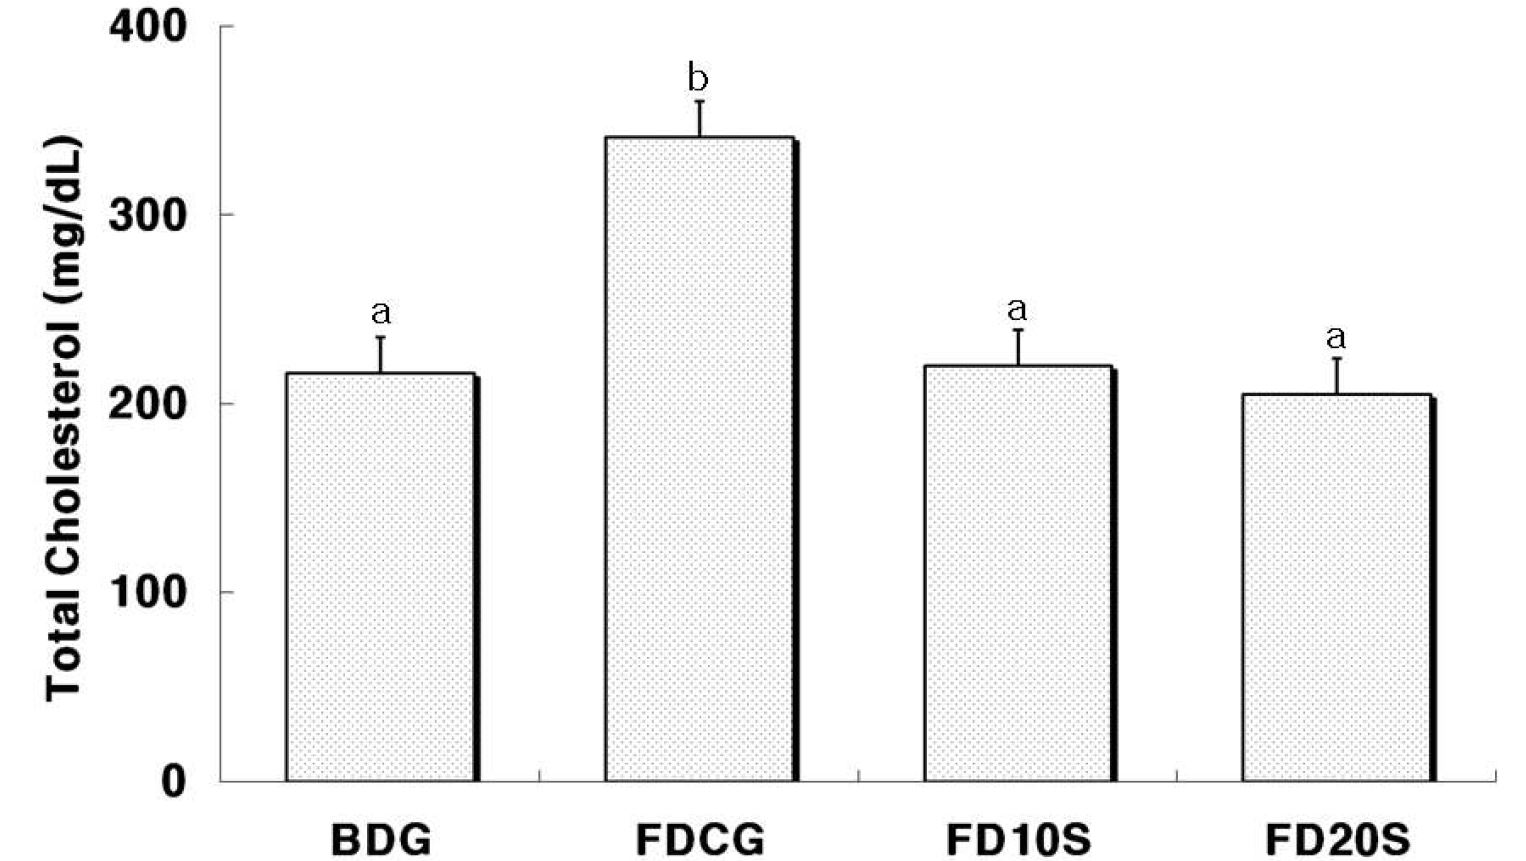 Fig. 3. Effects of Medicinal Plant Extract powder on serum total cholesterol in rats fed high fat diets.